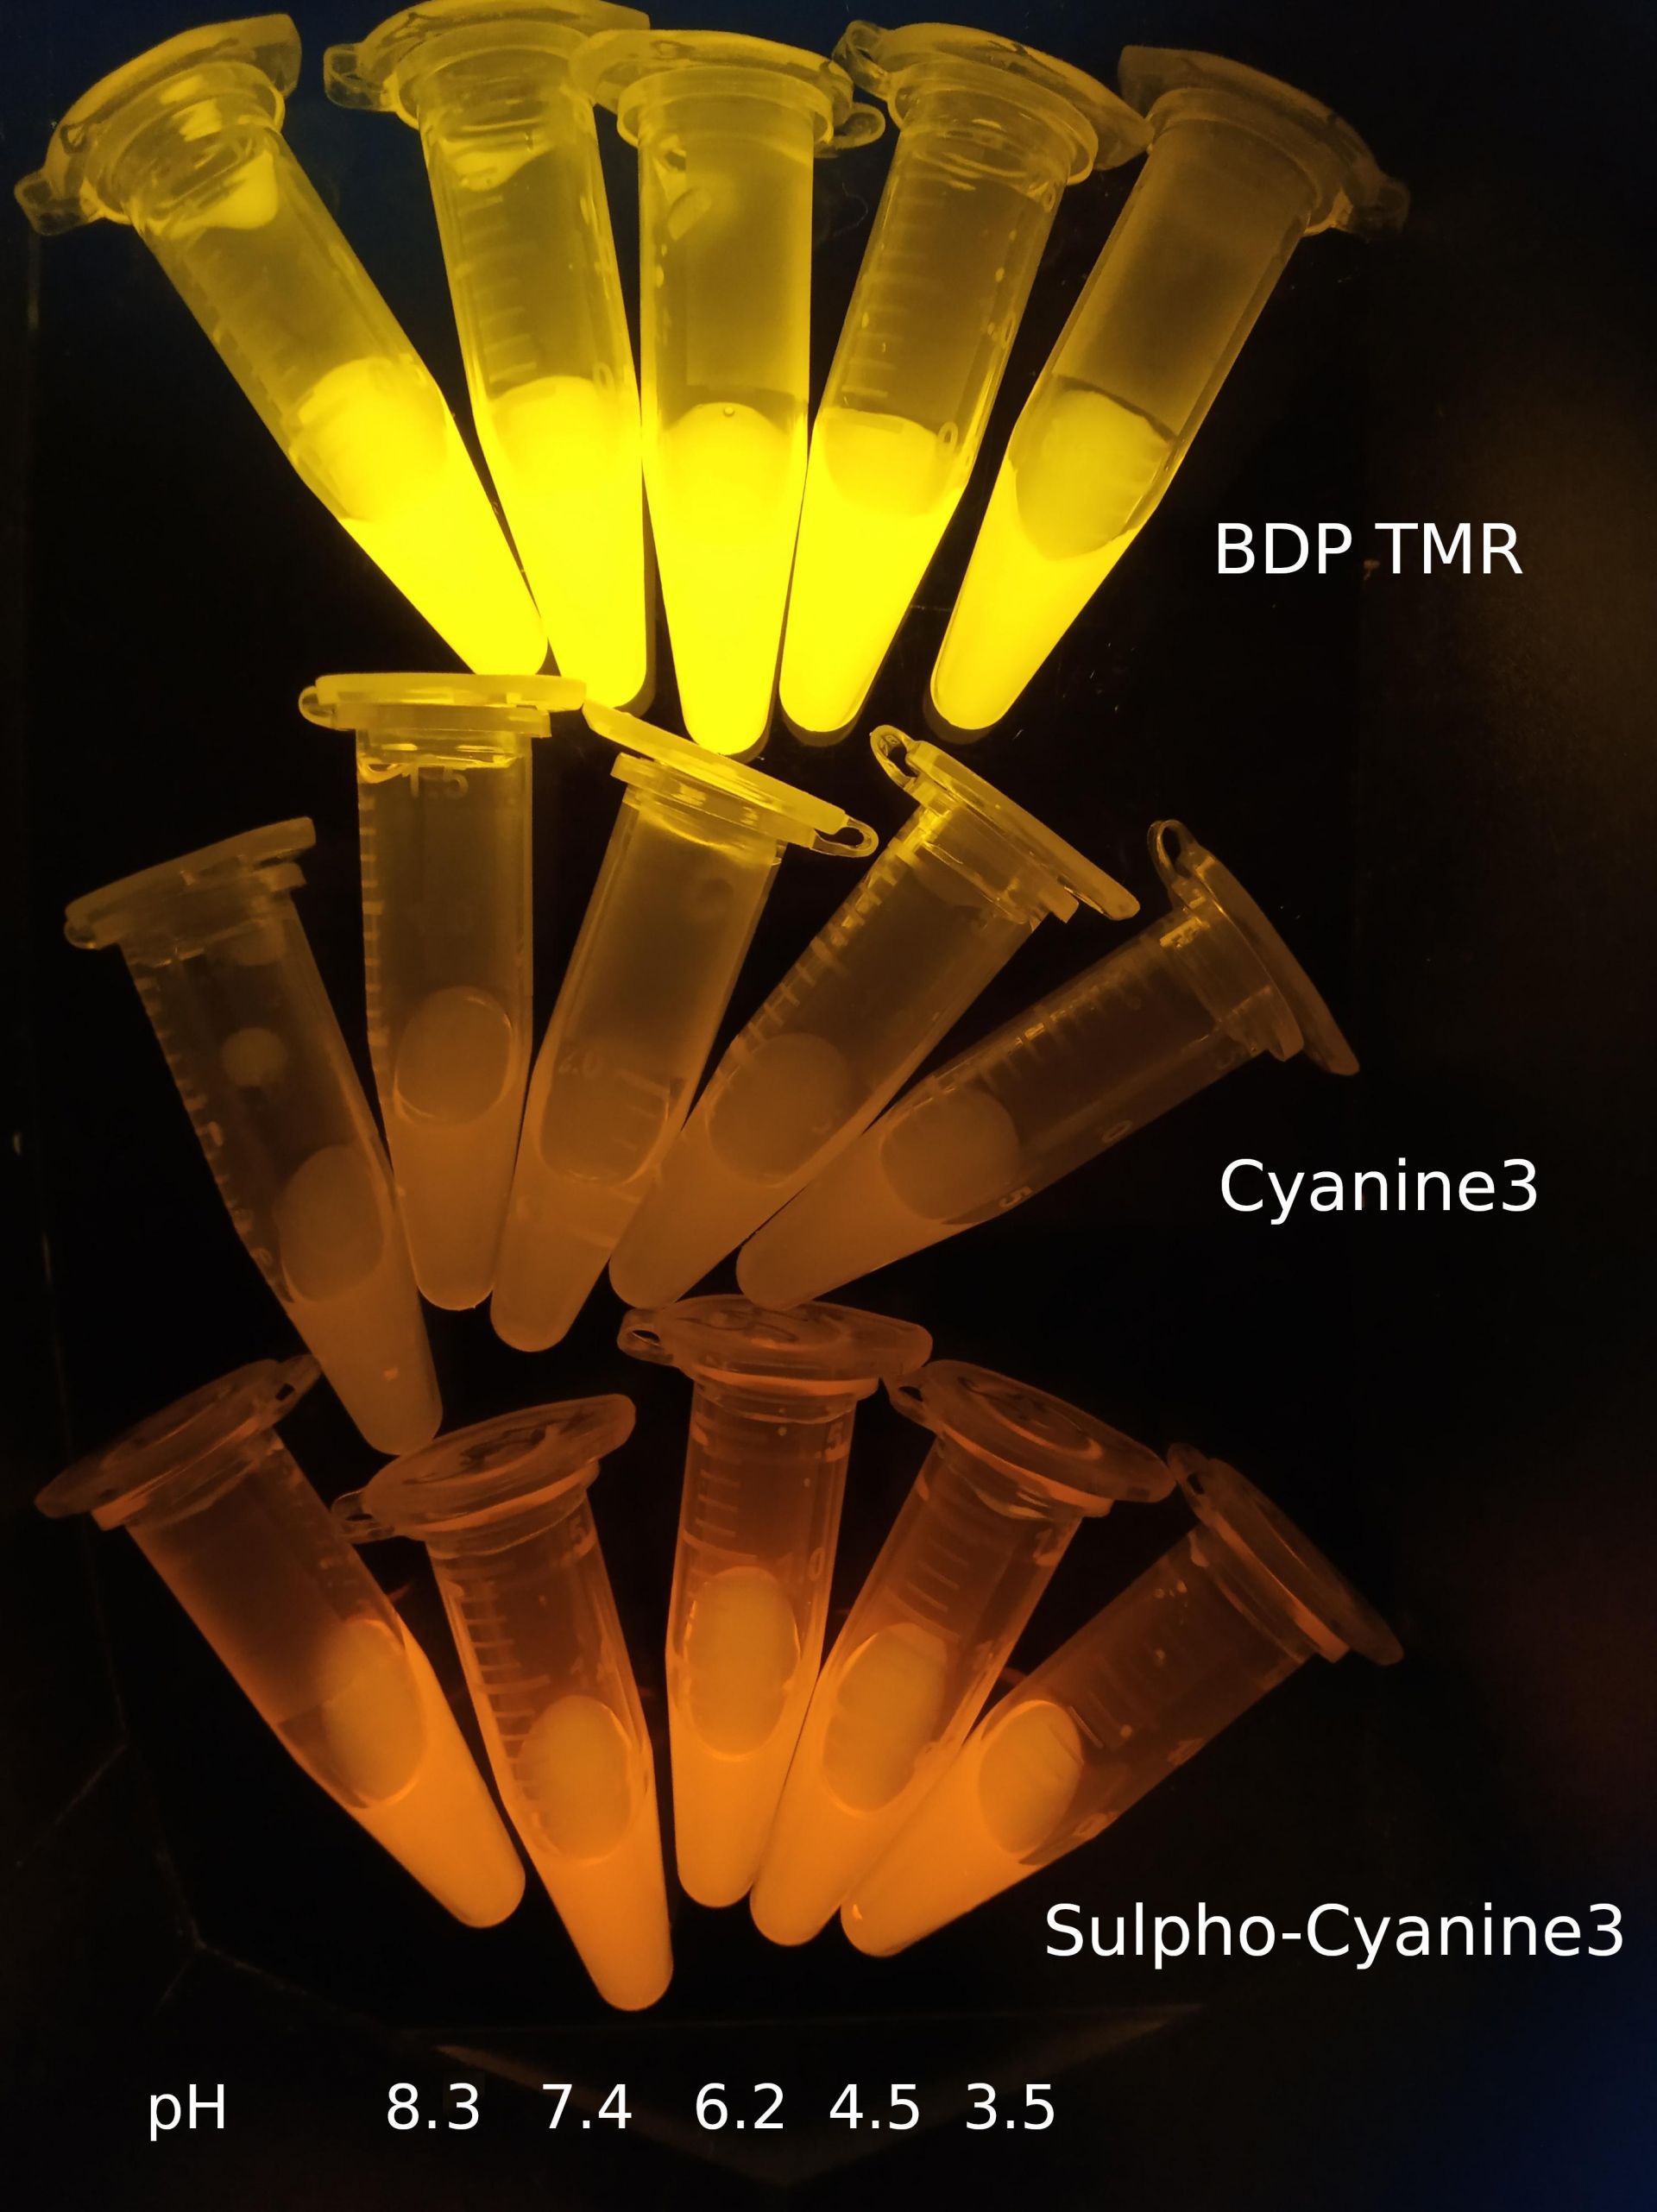 Visible fluorescence of Cyanine3; Sulfo-Cyanine3; BDP TMR in tubes under UV light 